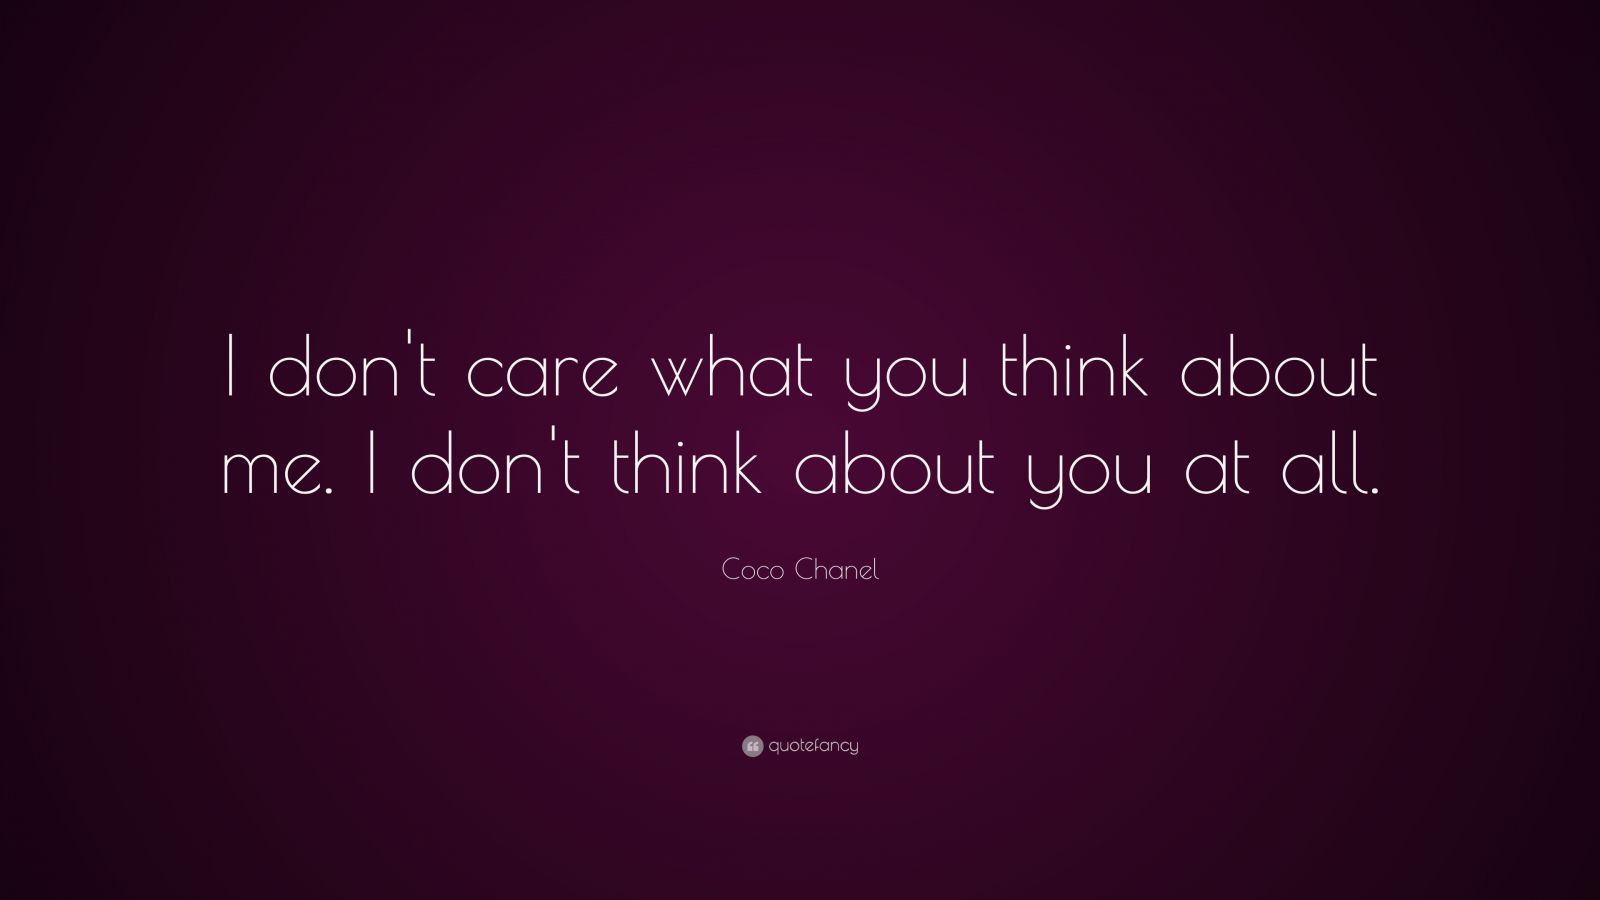 Coco Chanel Quote: “I don't care what you think about me. I don't think  about you at all.”